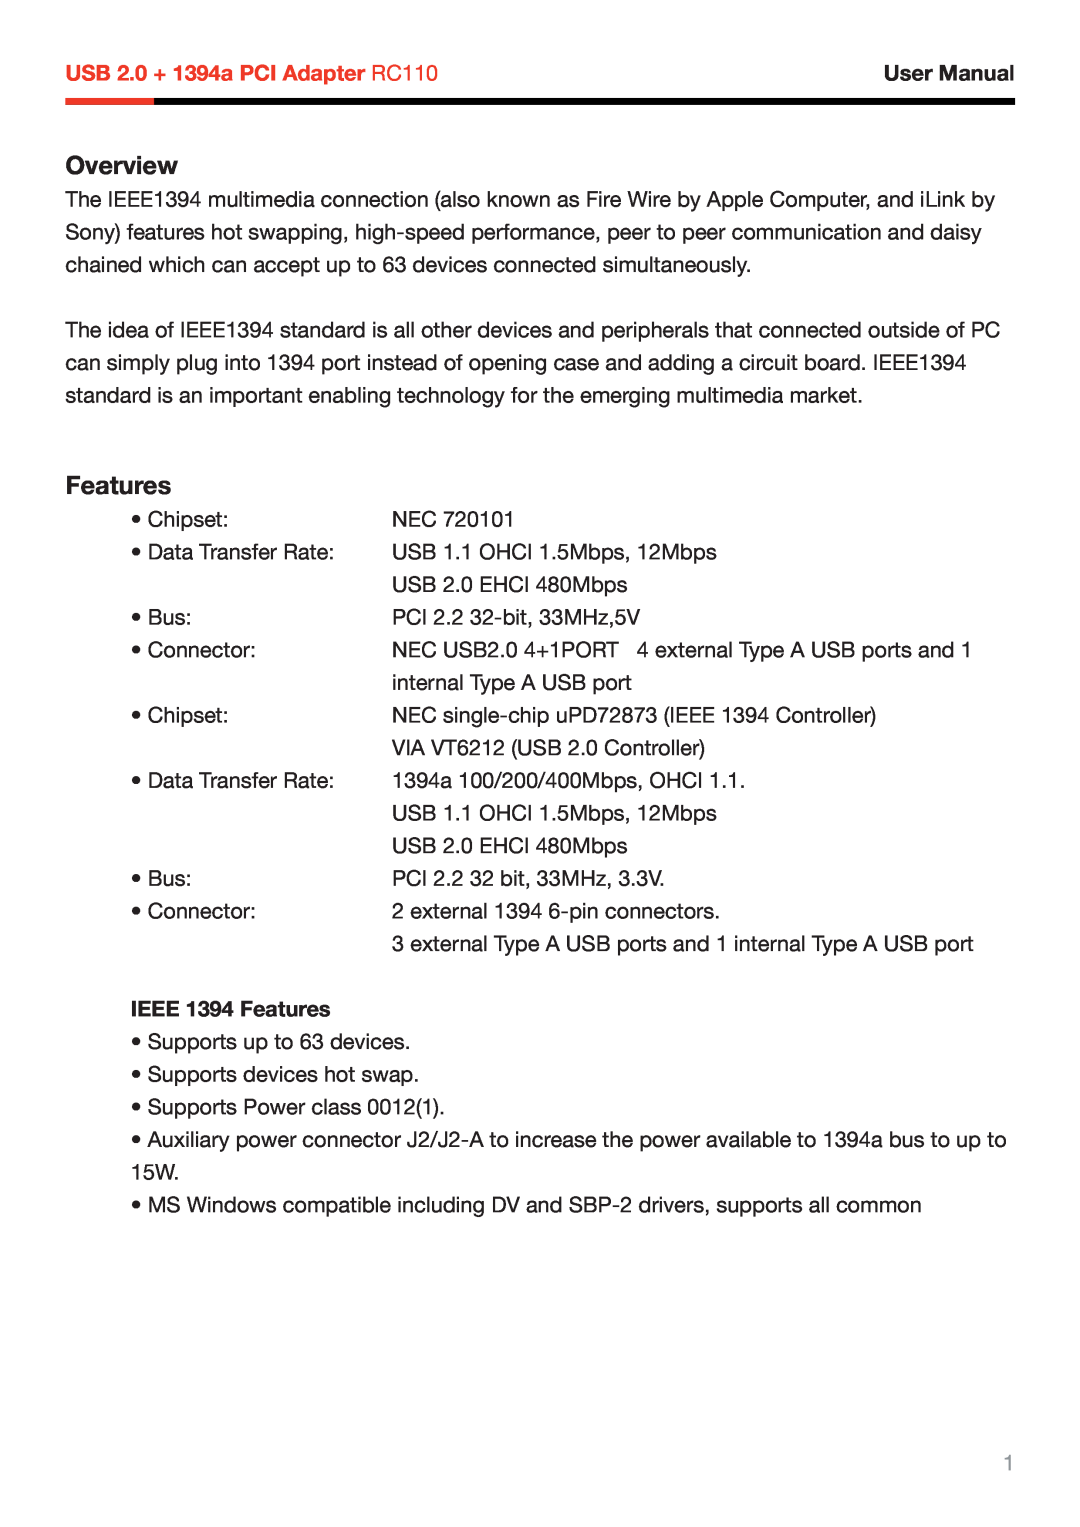 Rosewill RC-110 user manual Overview, USB 2.0 + 1394a PCI Adapter RC110, User Manual, IEEE 1394 Features 